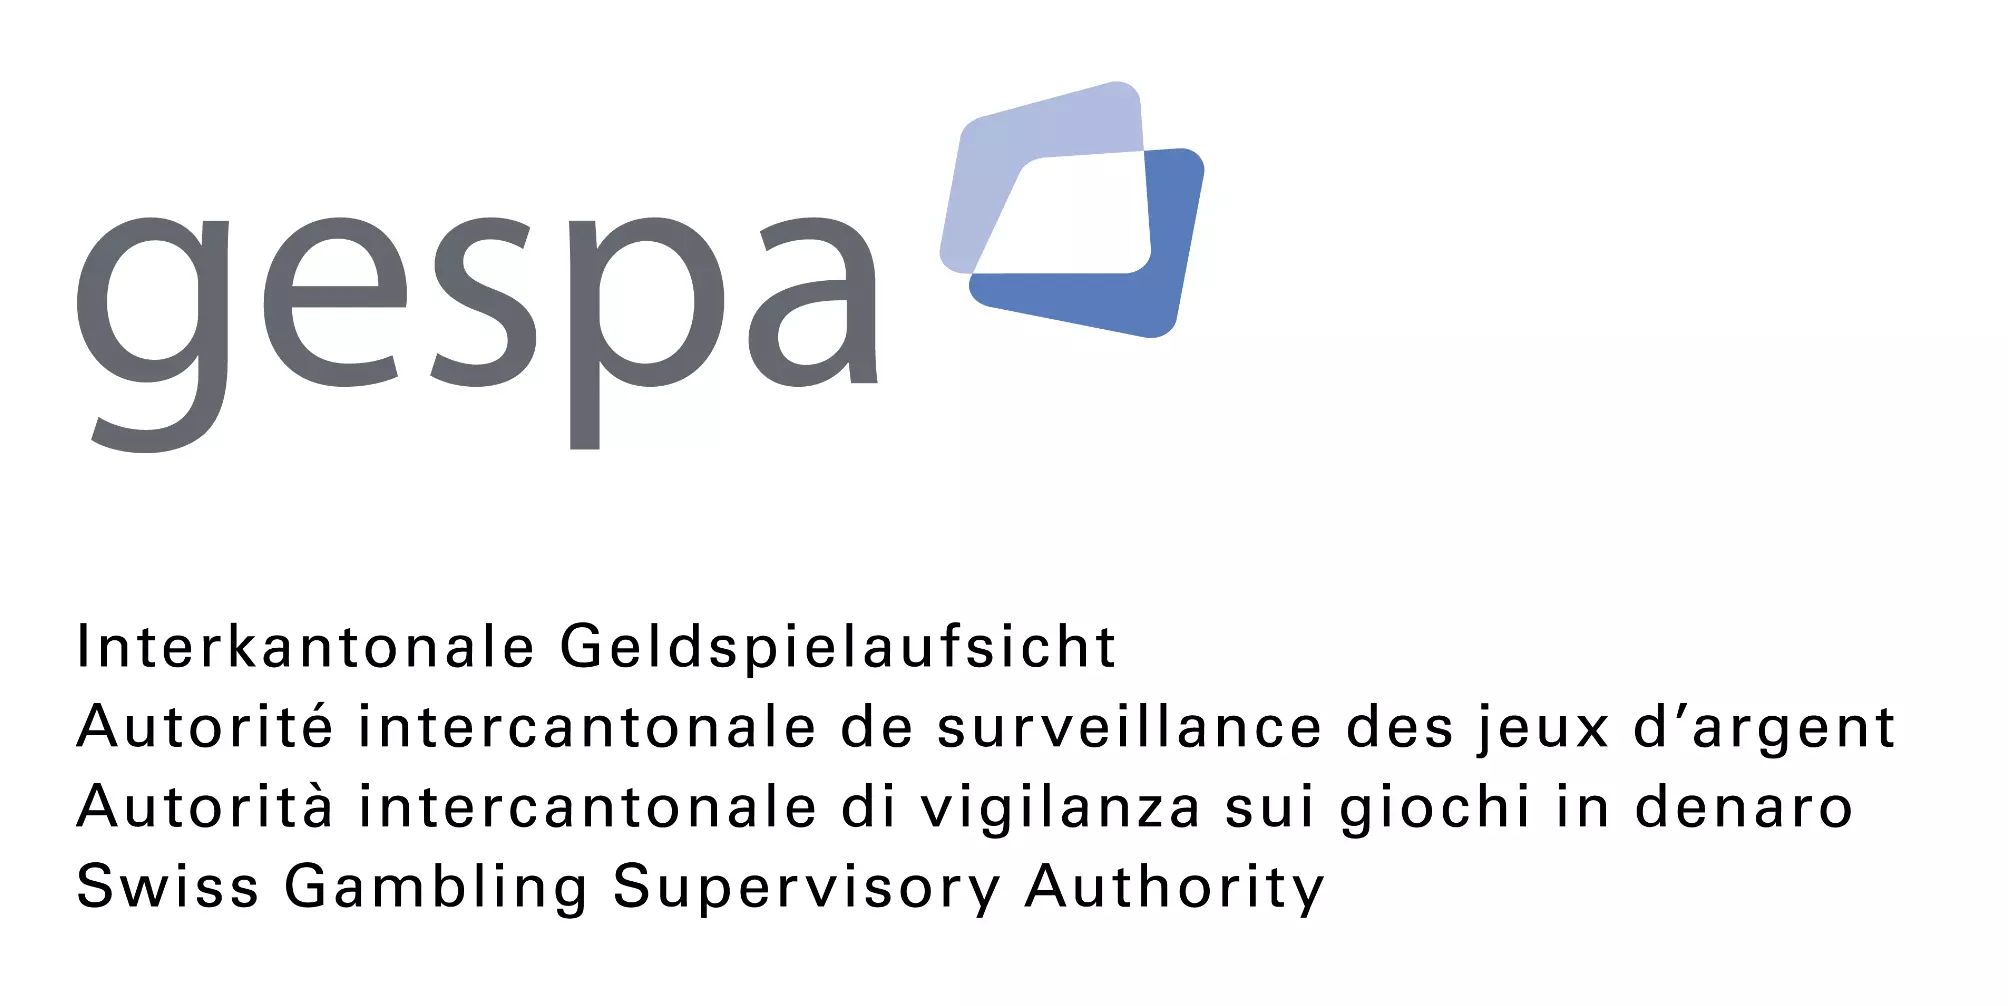 The Swiss Gambling Supervisory Authority or Gespa